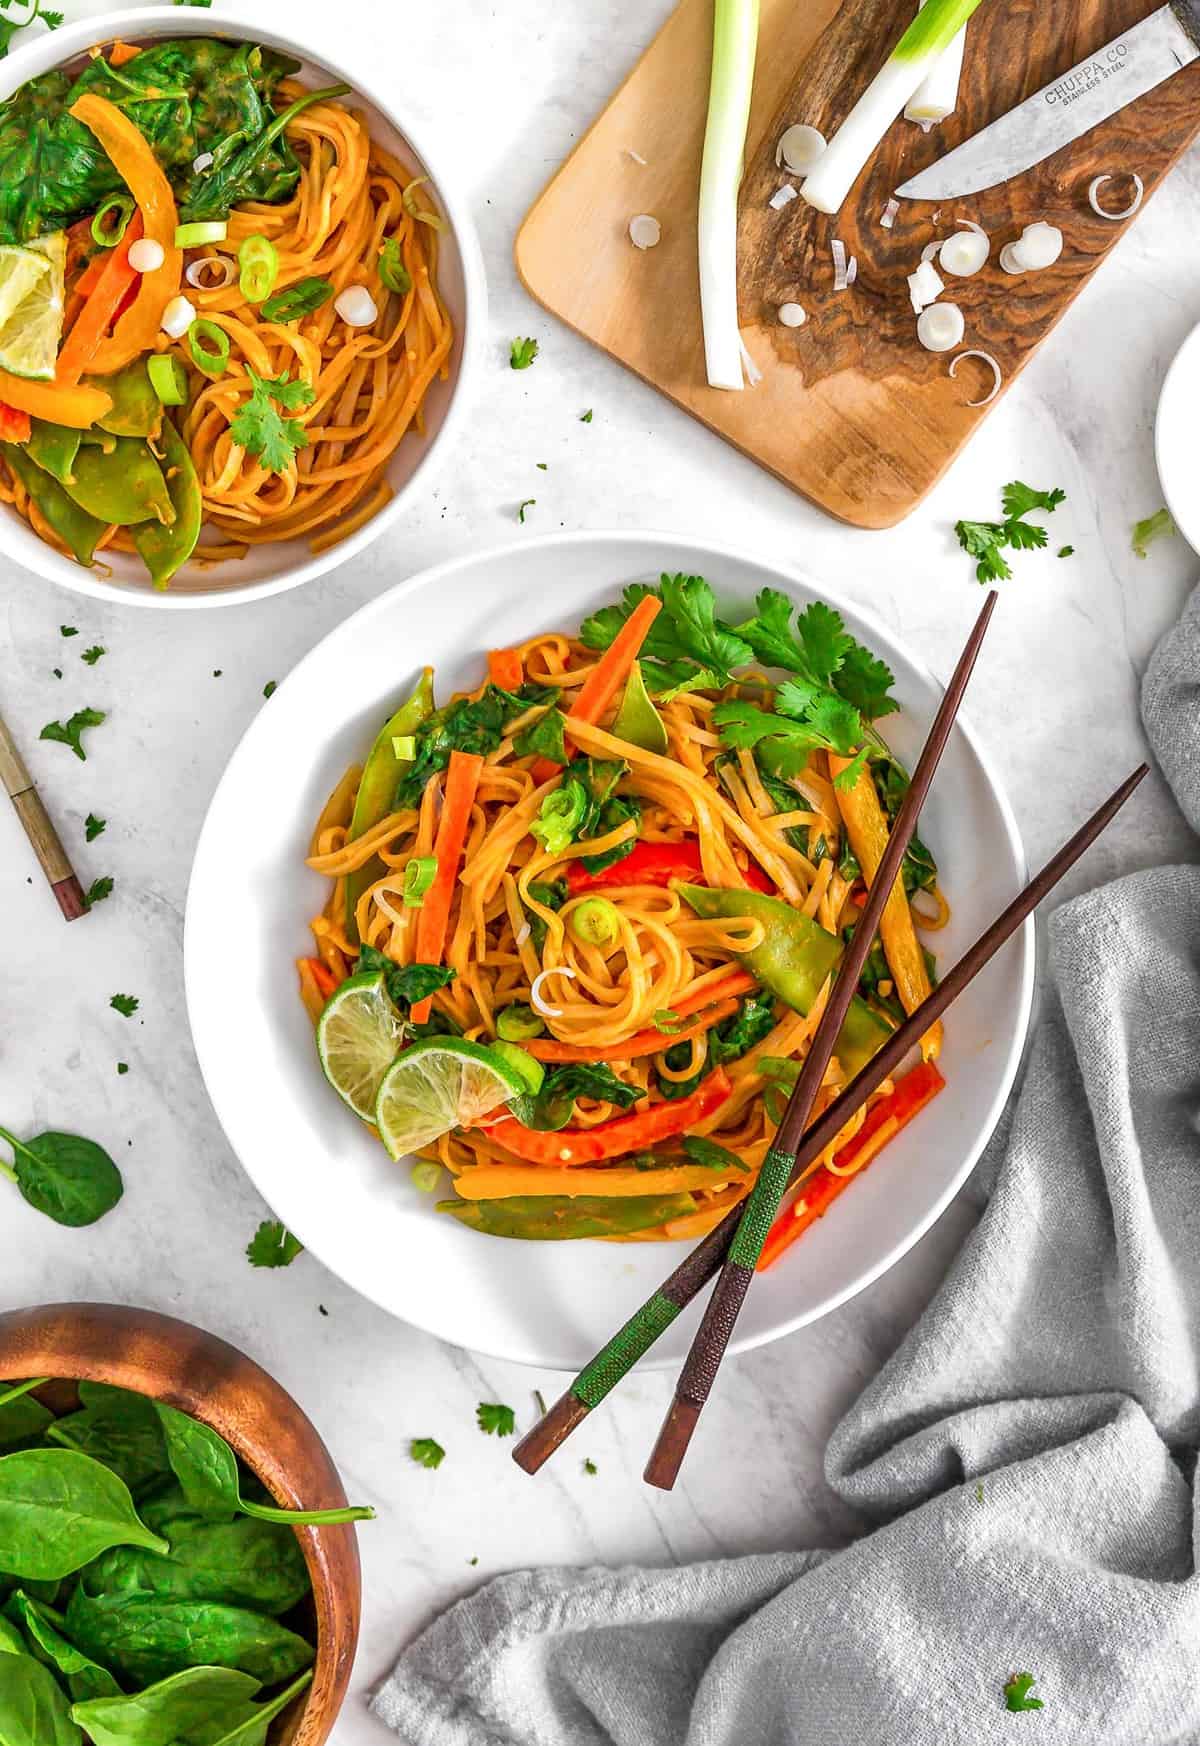 Fast and Easy Curry Noodles, vegan curry, vegan noodles, vegan dinner, plant based, vegan, vegetarian, whole food plant based, gluten free, recipe, wfpb, healthy, healthy vegan, oil free, no refined sugar, no oil, refined sugar free, dairy free, noodles, curry, veggies, dinner, fast recipe, easy recipe